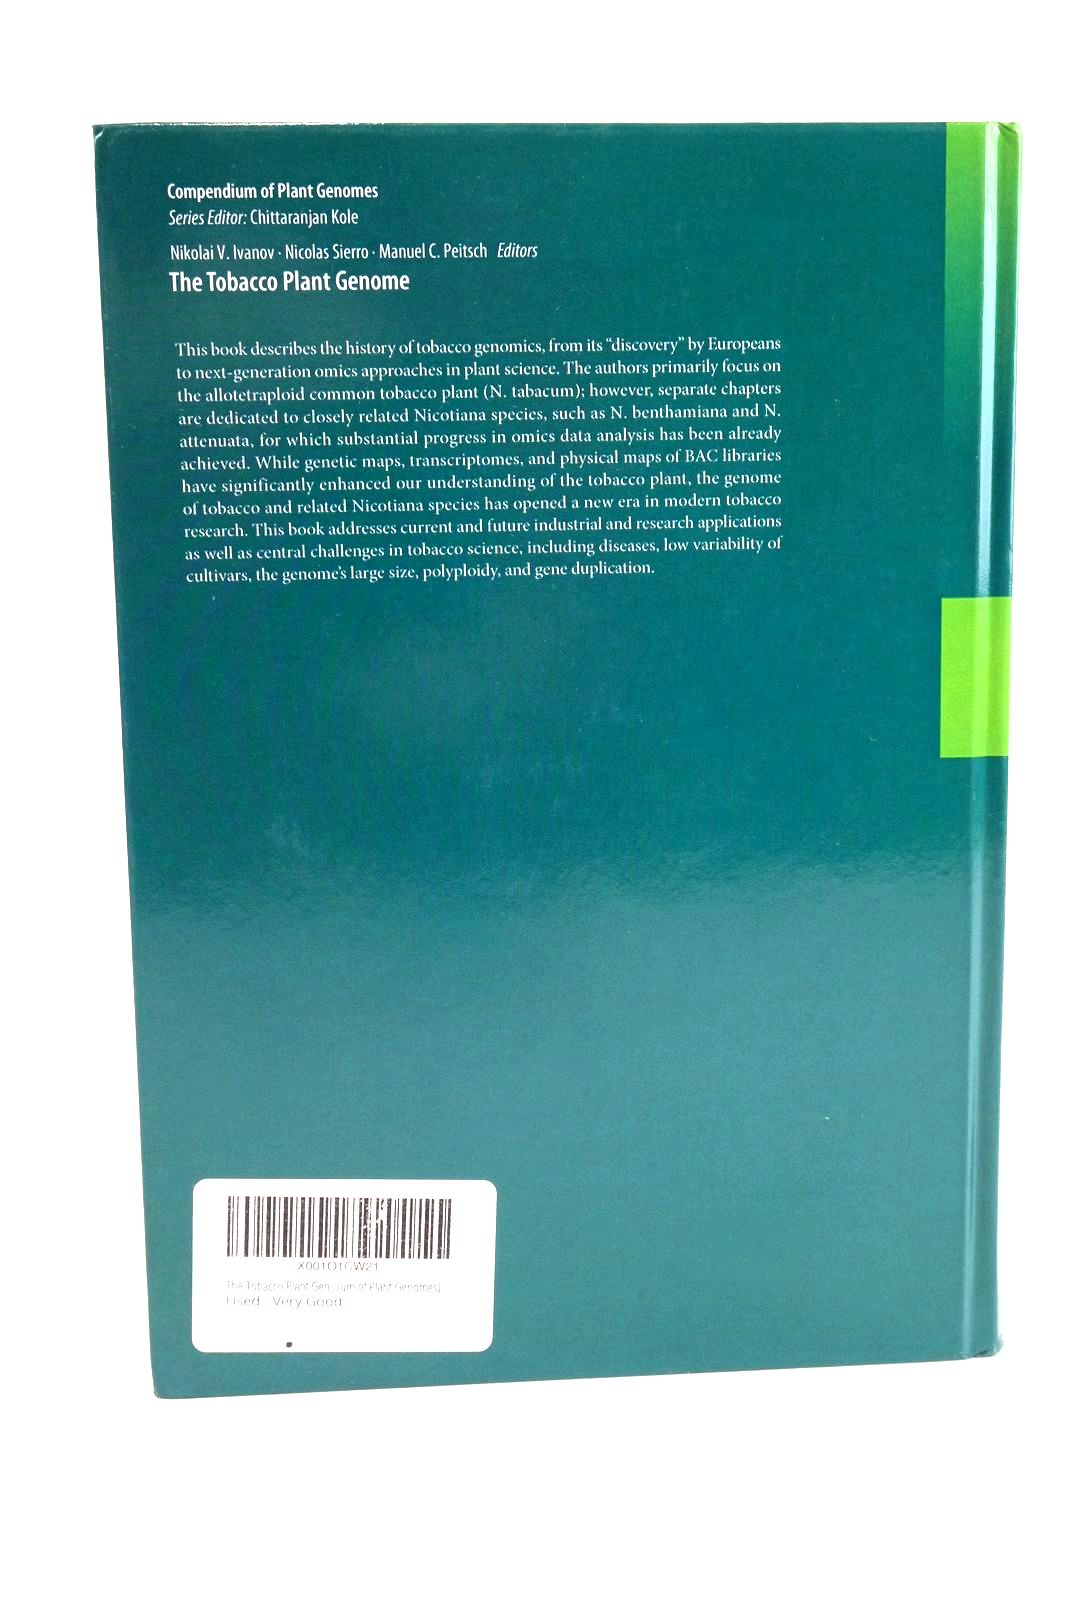 Photo of THE TOBACCO PLANT GENOME written by Ivanov, Nikolai V.
Sierro, Nicolas
Peitsch, Manuel C. published by Springer (STOCK CODE: 1324172)  for sale by Stella & Rose's Books